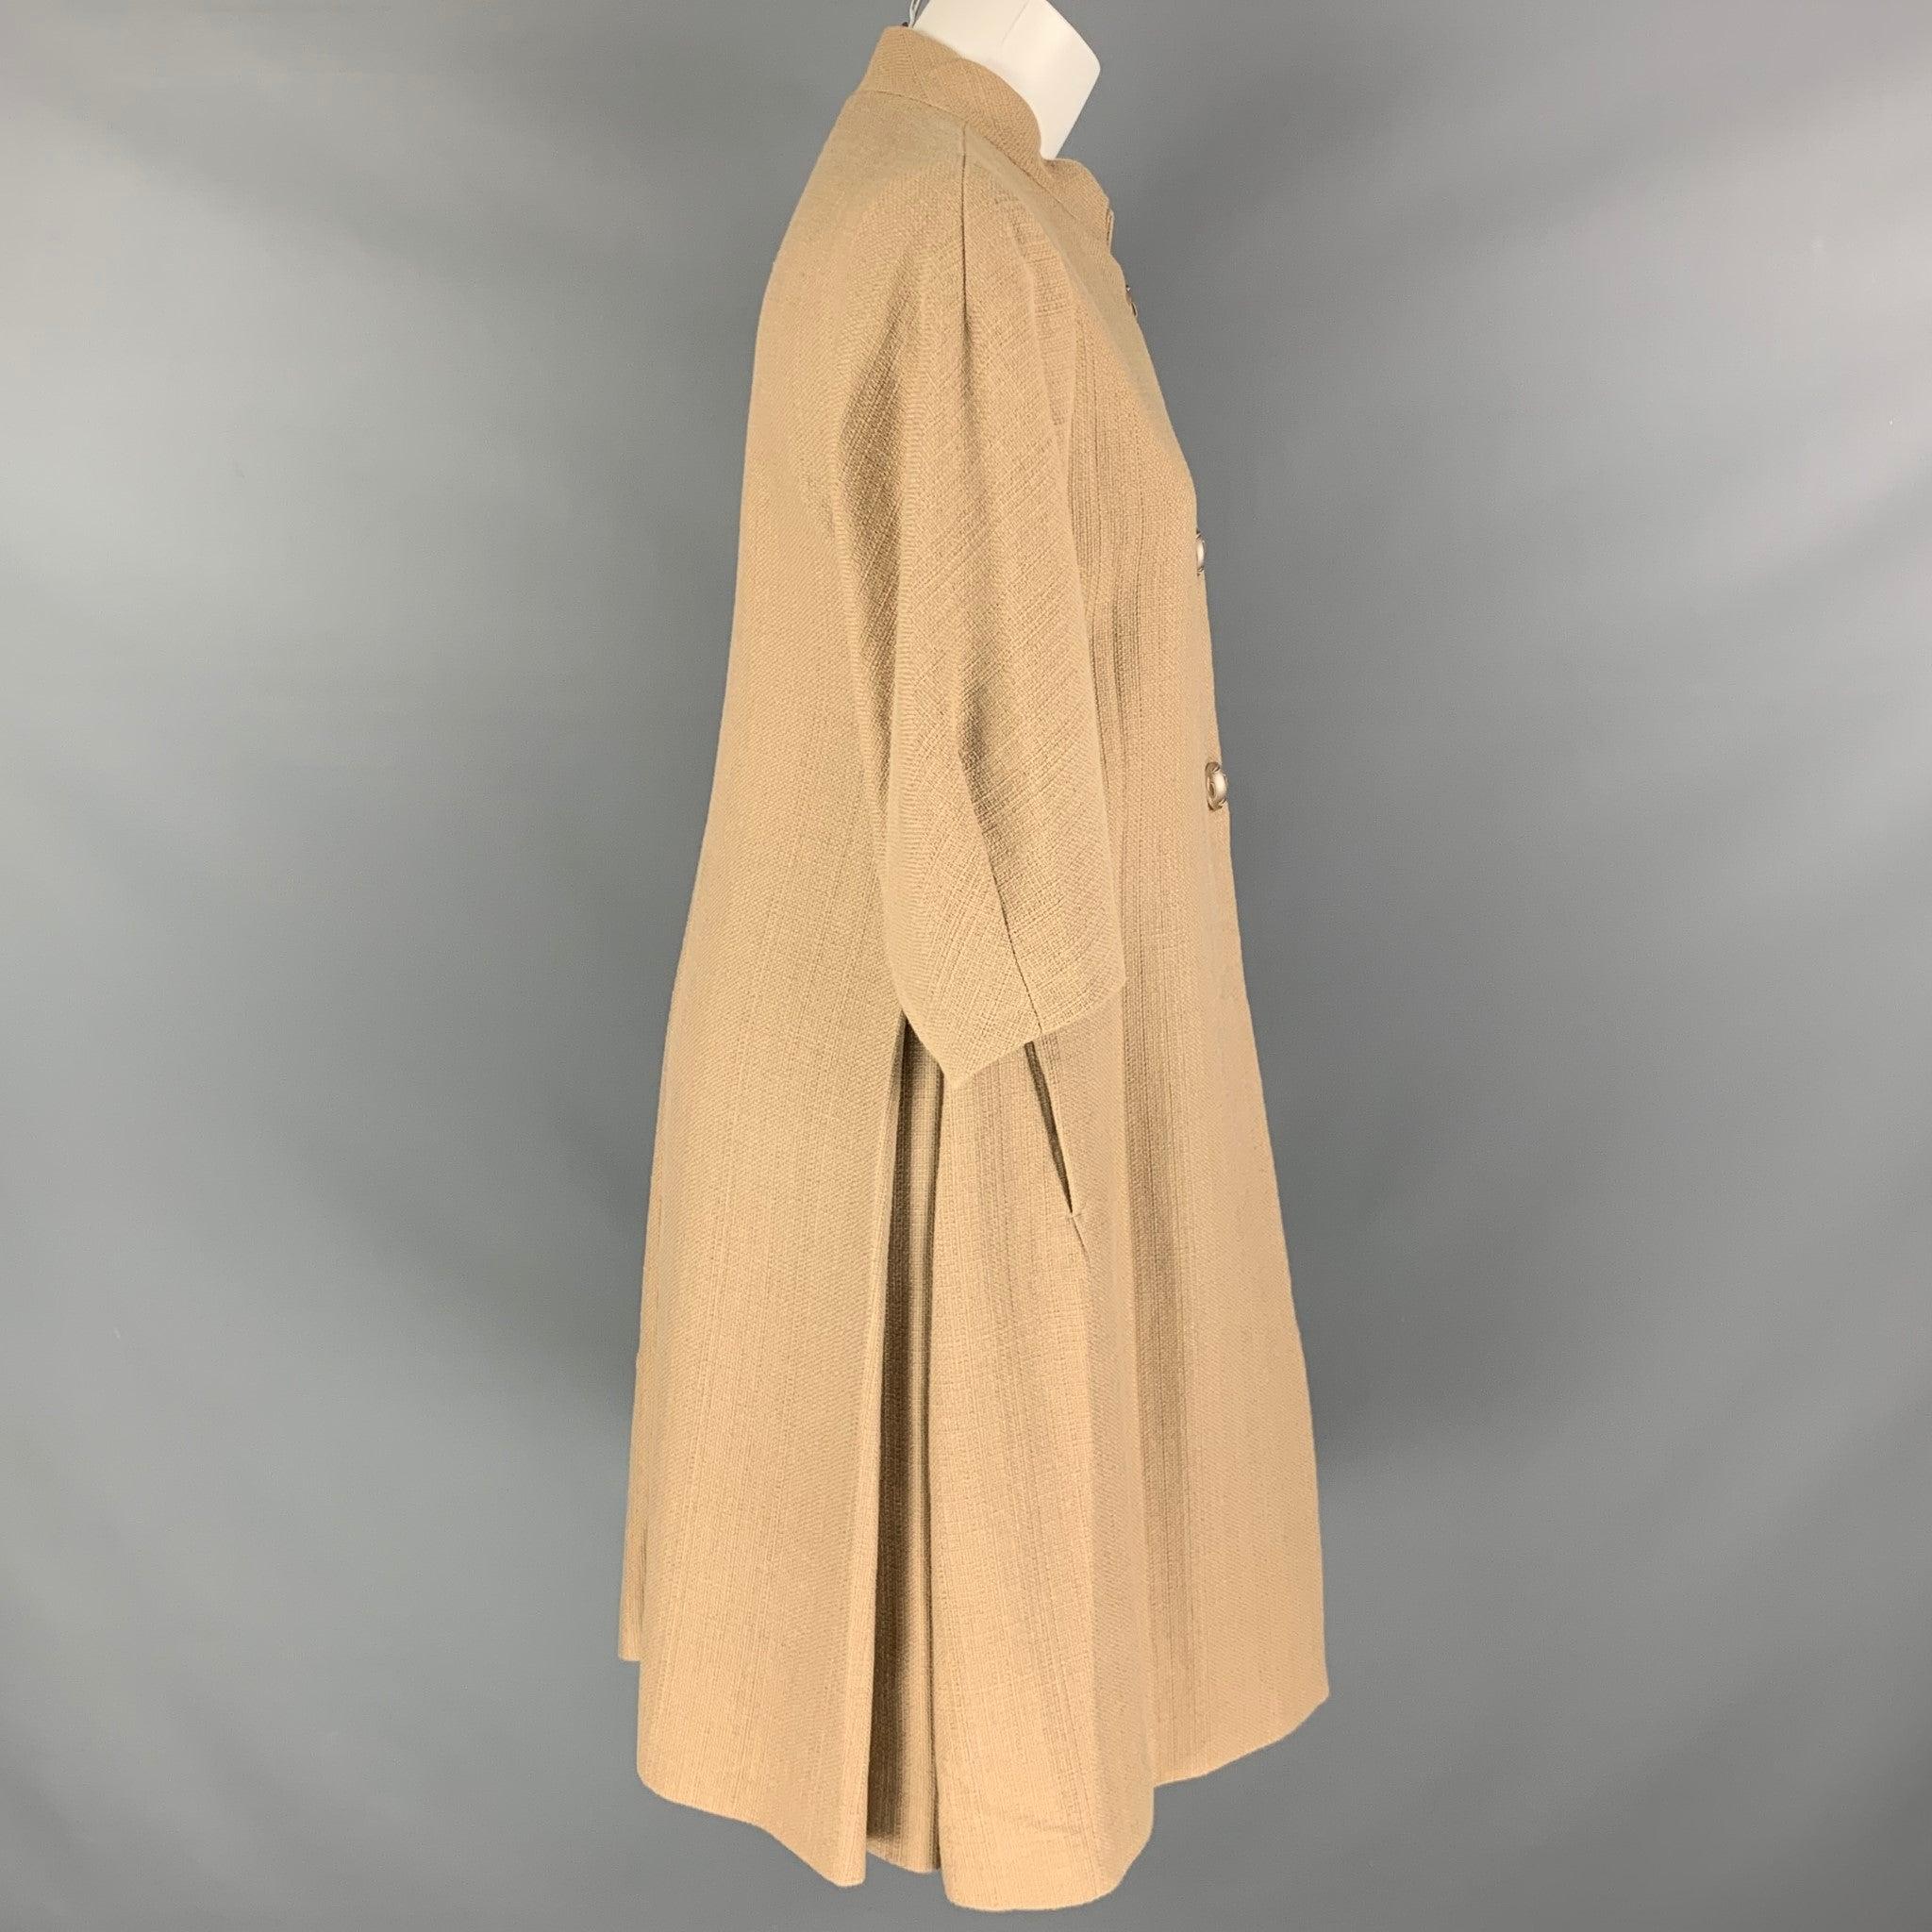 NICOLE FARHI coat comes in a beige cotton woven material featuring a novelty buttons, side pockets, 3/4 sleeves, snap button closure, and A-line silhouette. Excellent Pre-Owned Condition. 

Marked:  6 

Measurements: 
 
Shoulder: 16.5 inches Bust: